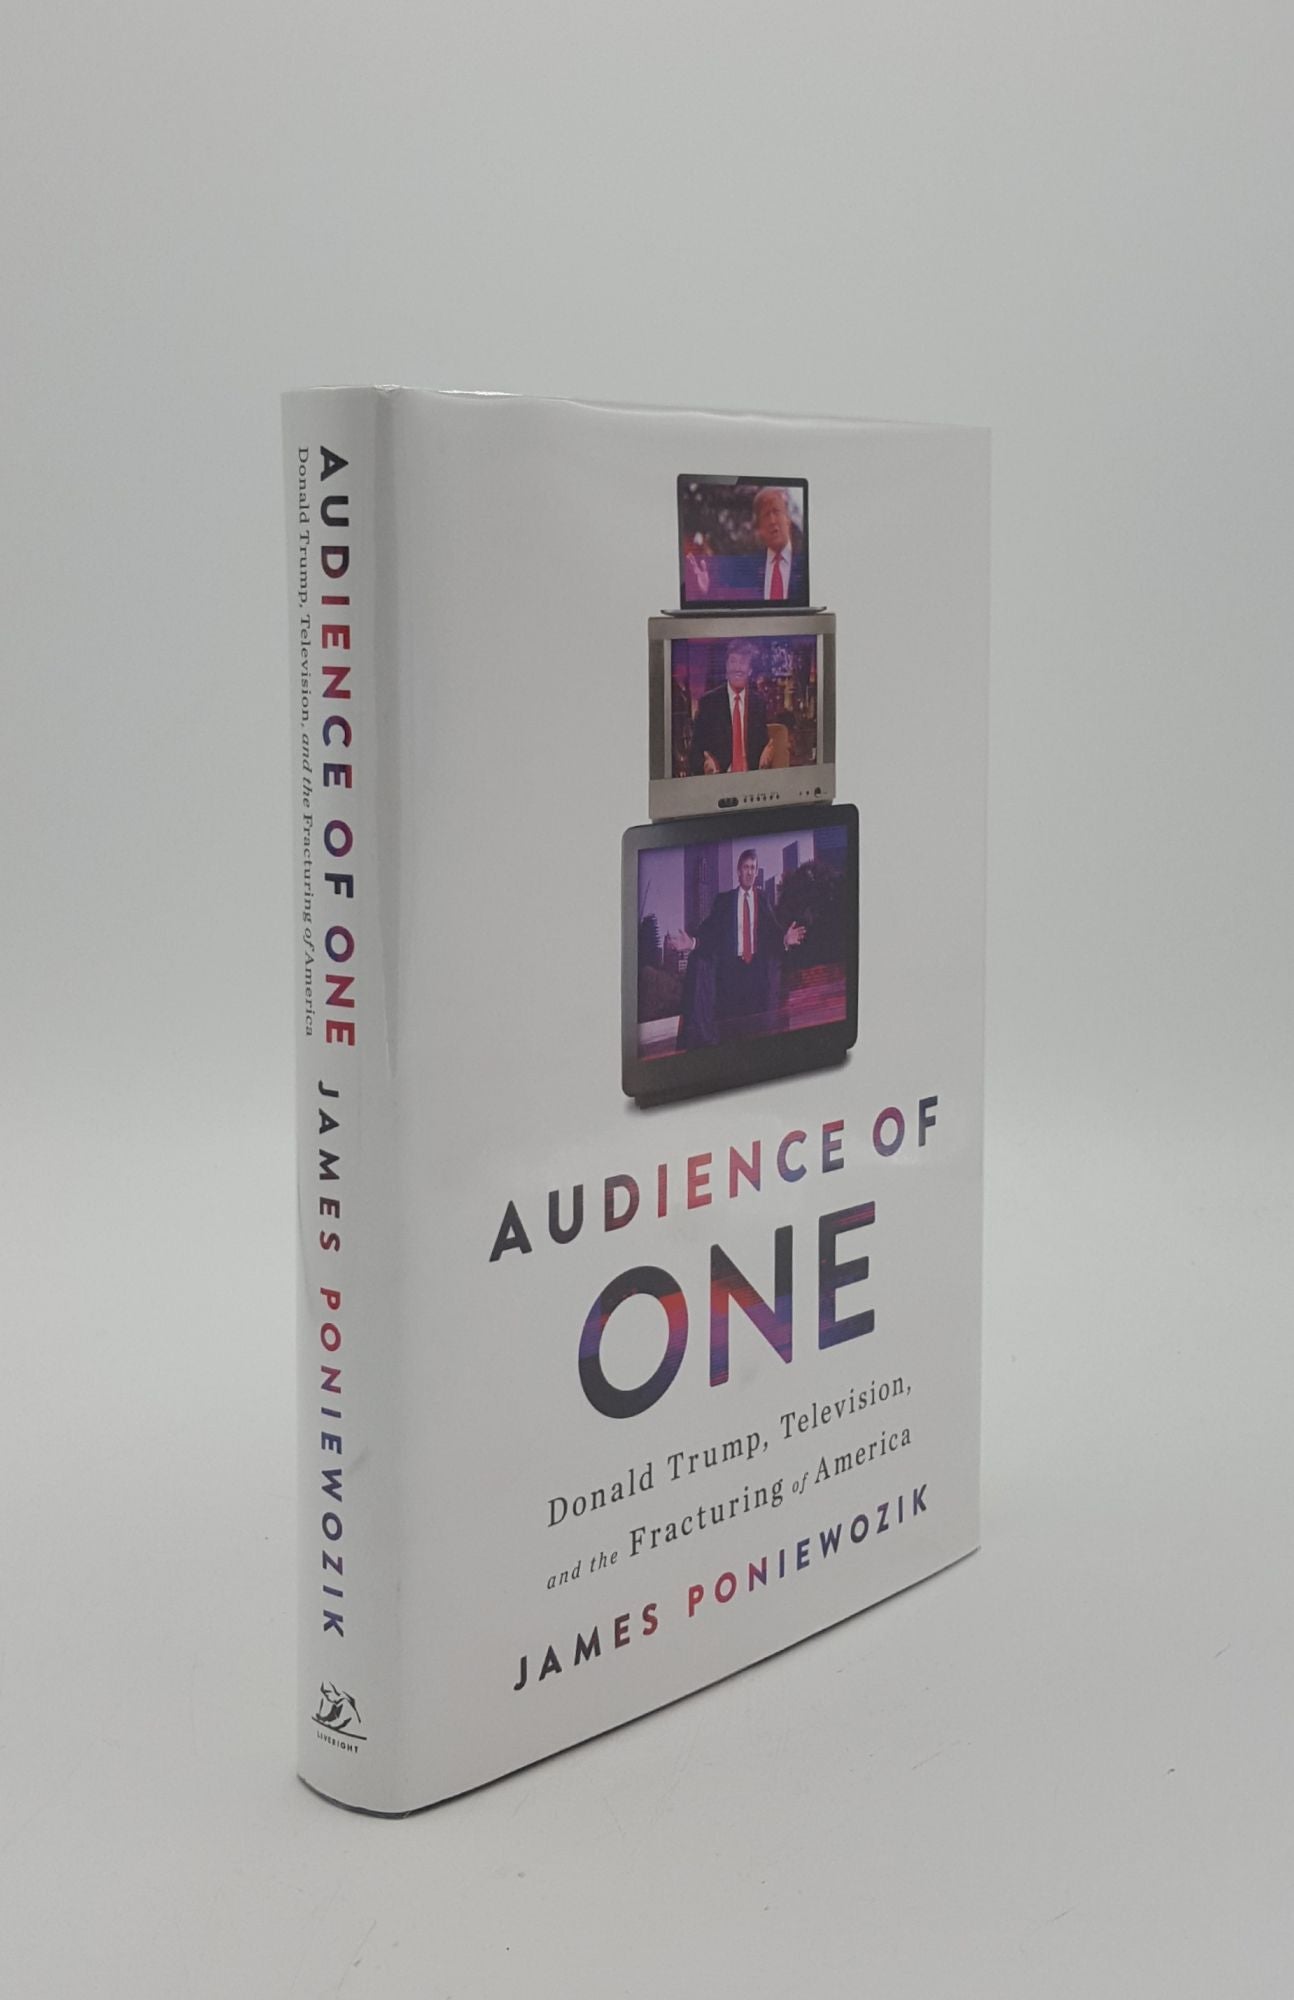 PONIEWOZIK James - Audience of One Donald Trump Television and the Fracturing of America